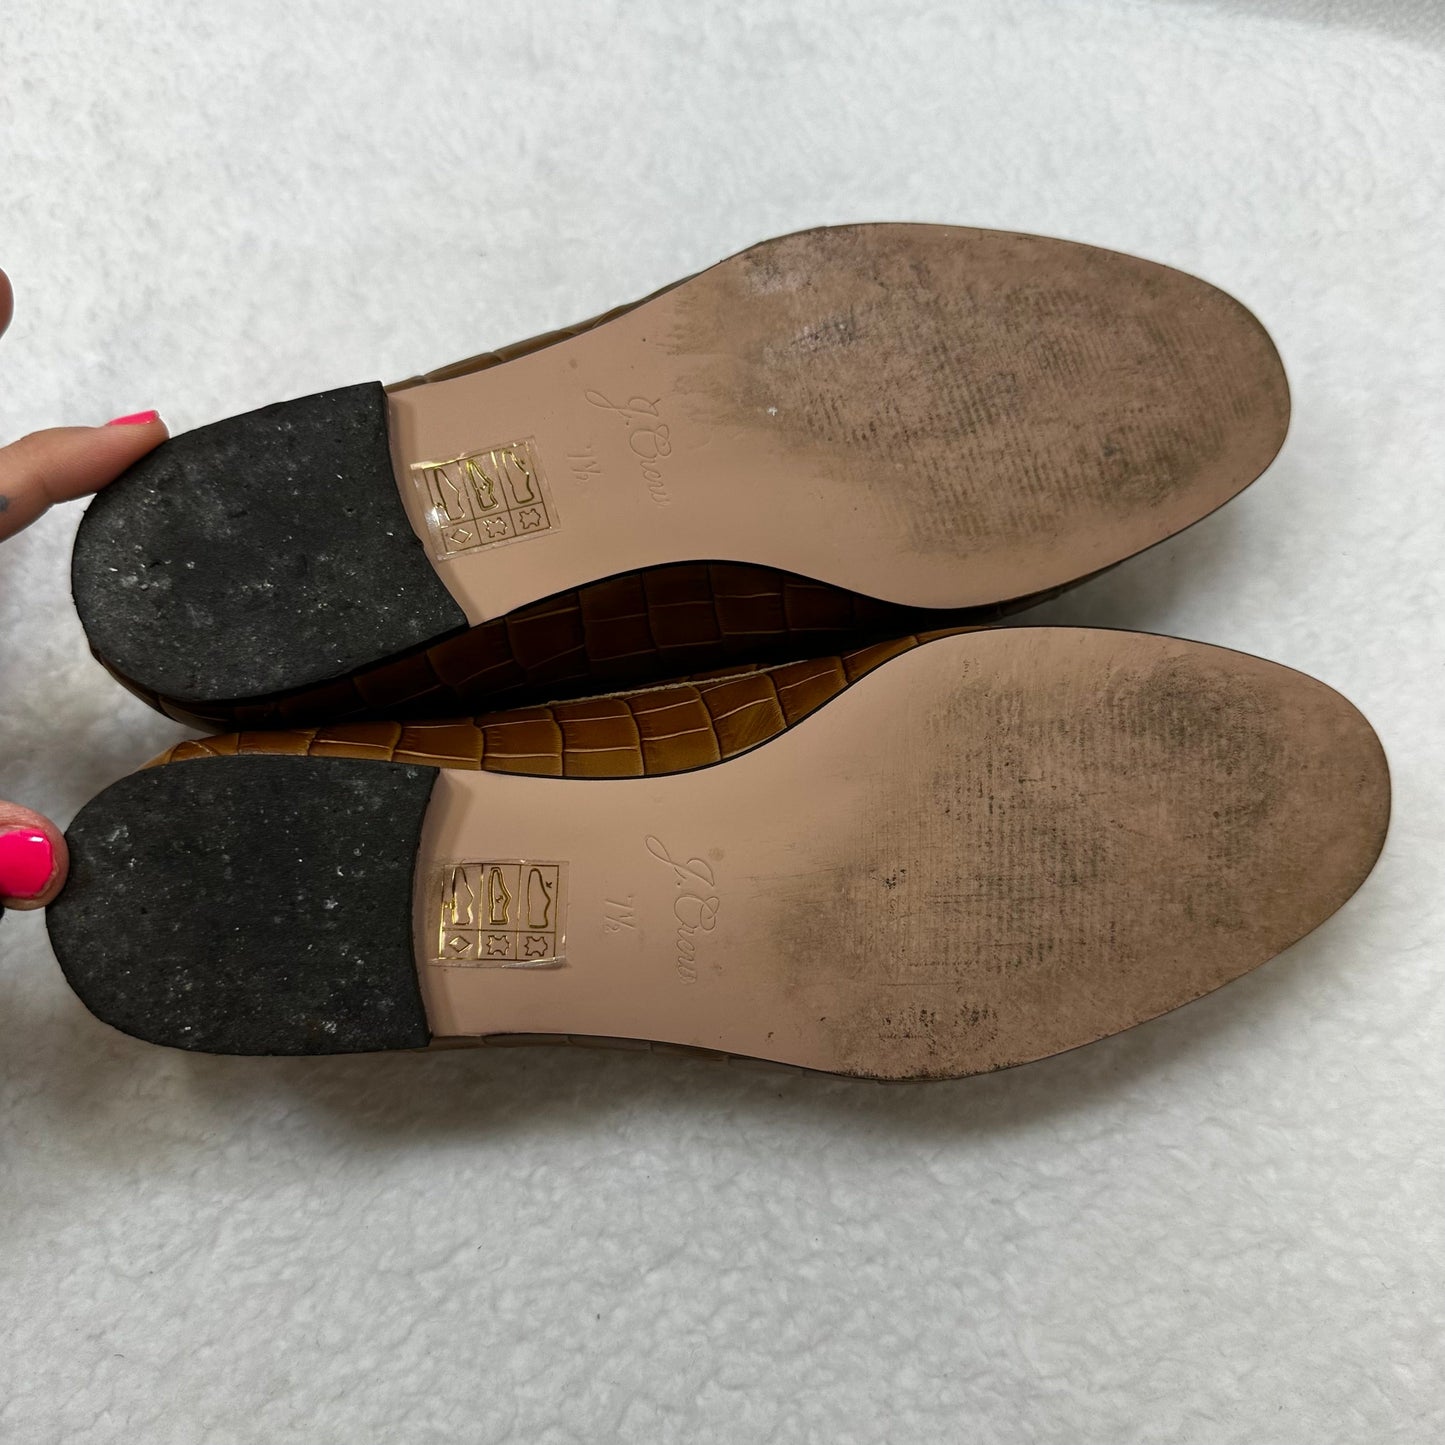 Shoes Flats Boat By J Crew  Size: 7.5